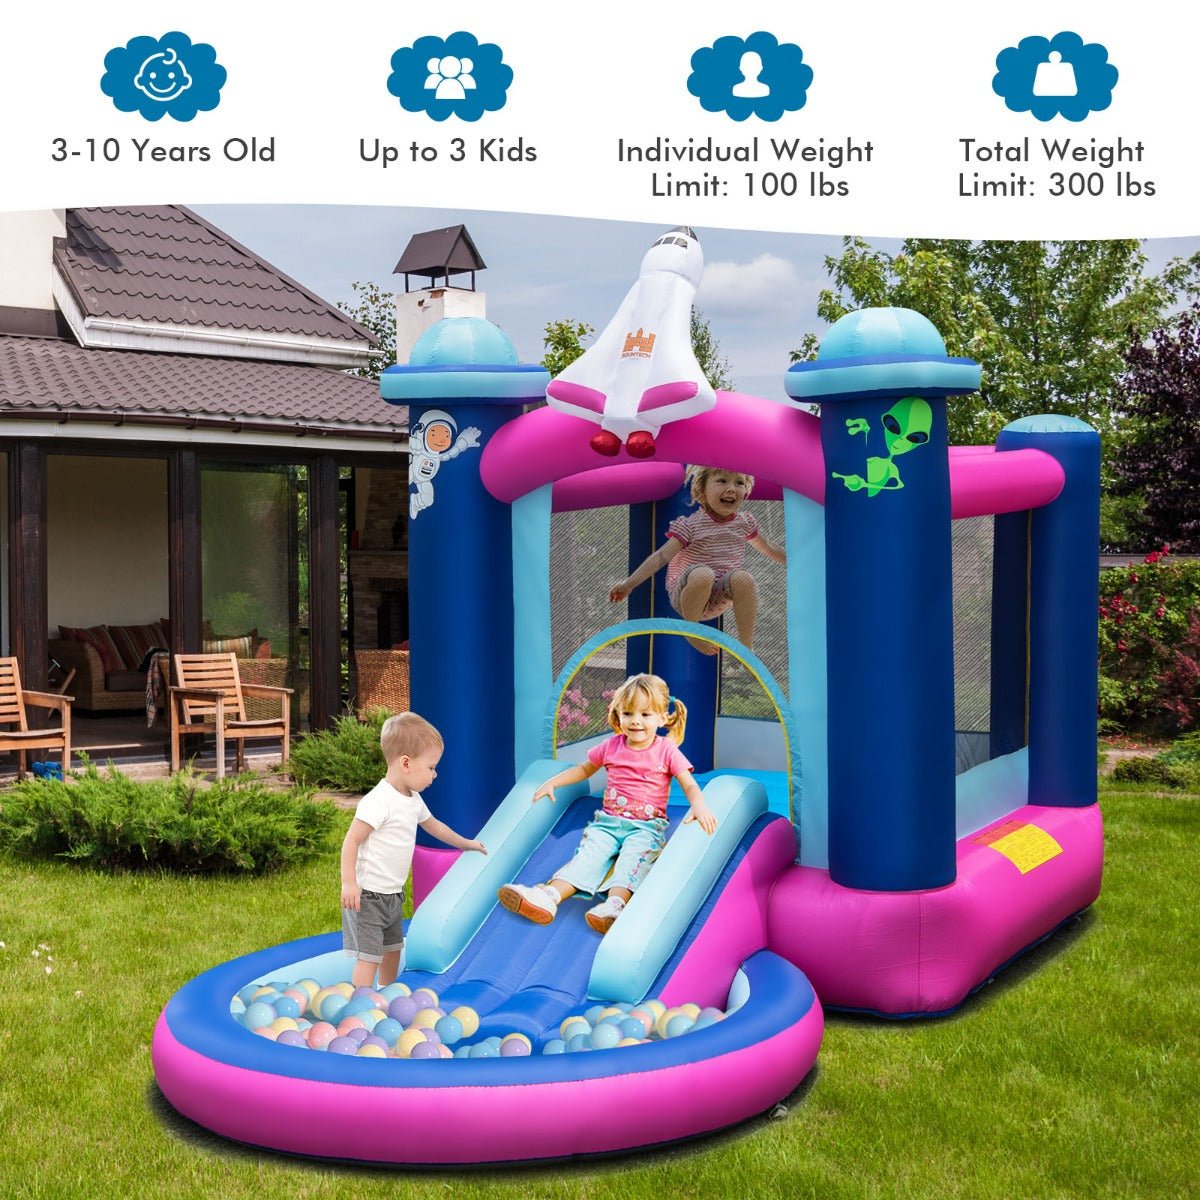 Space Exploration Inflatable with Jumping Area & Slide - Kids Galactic Fun